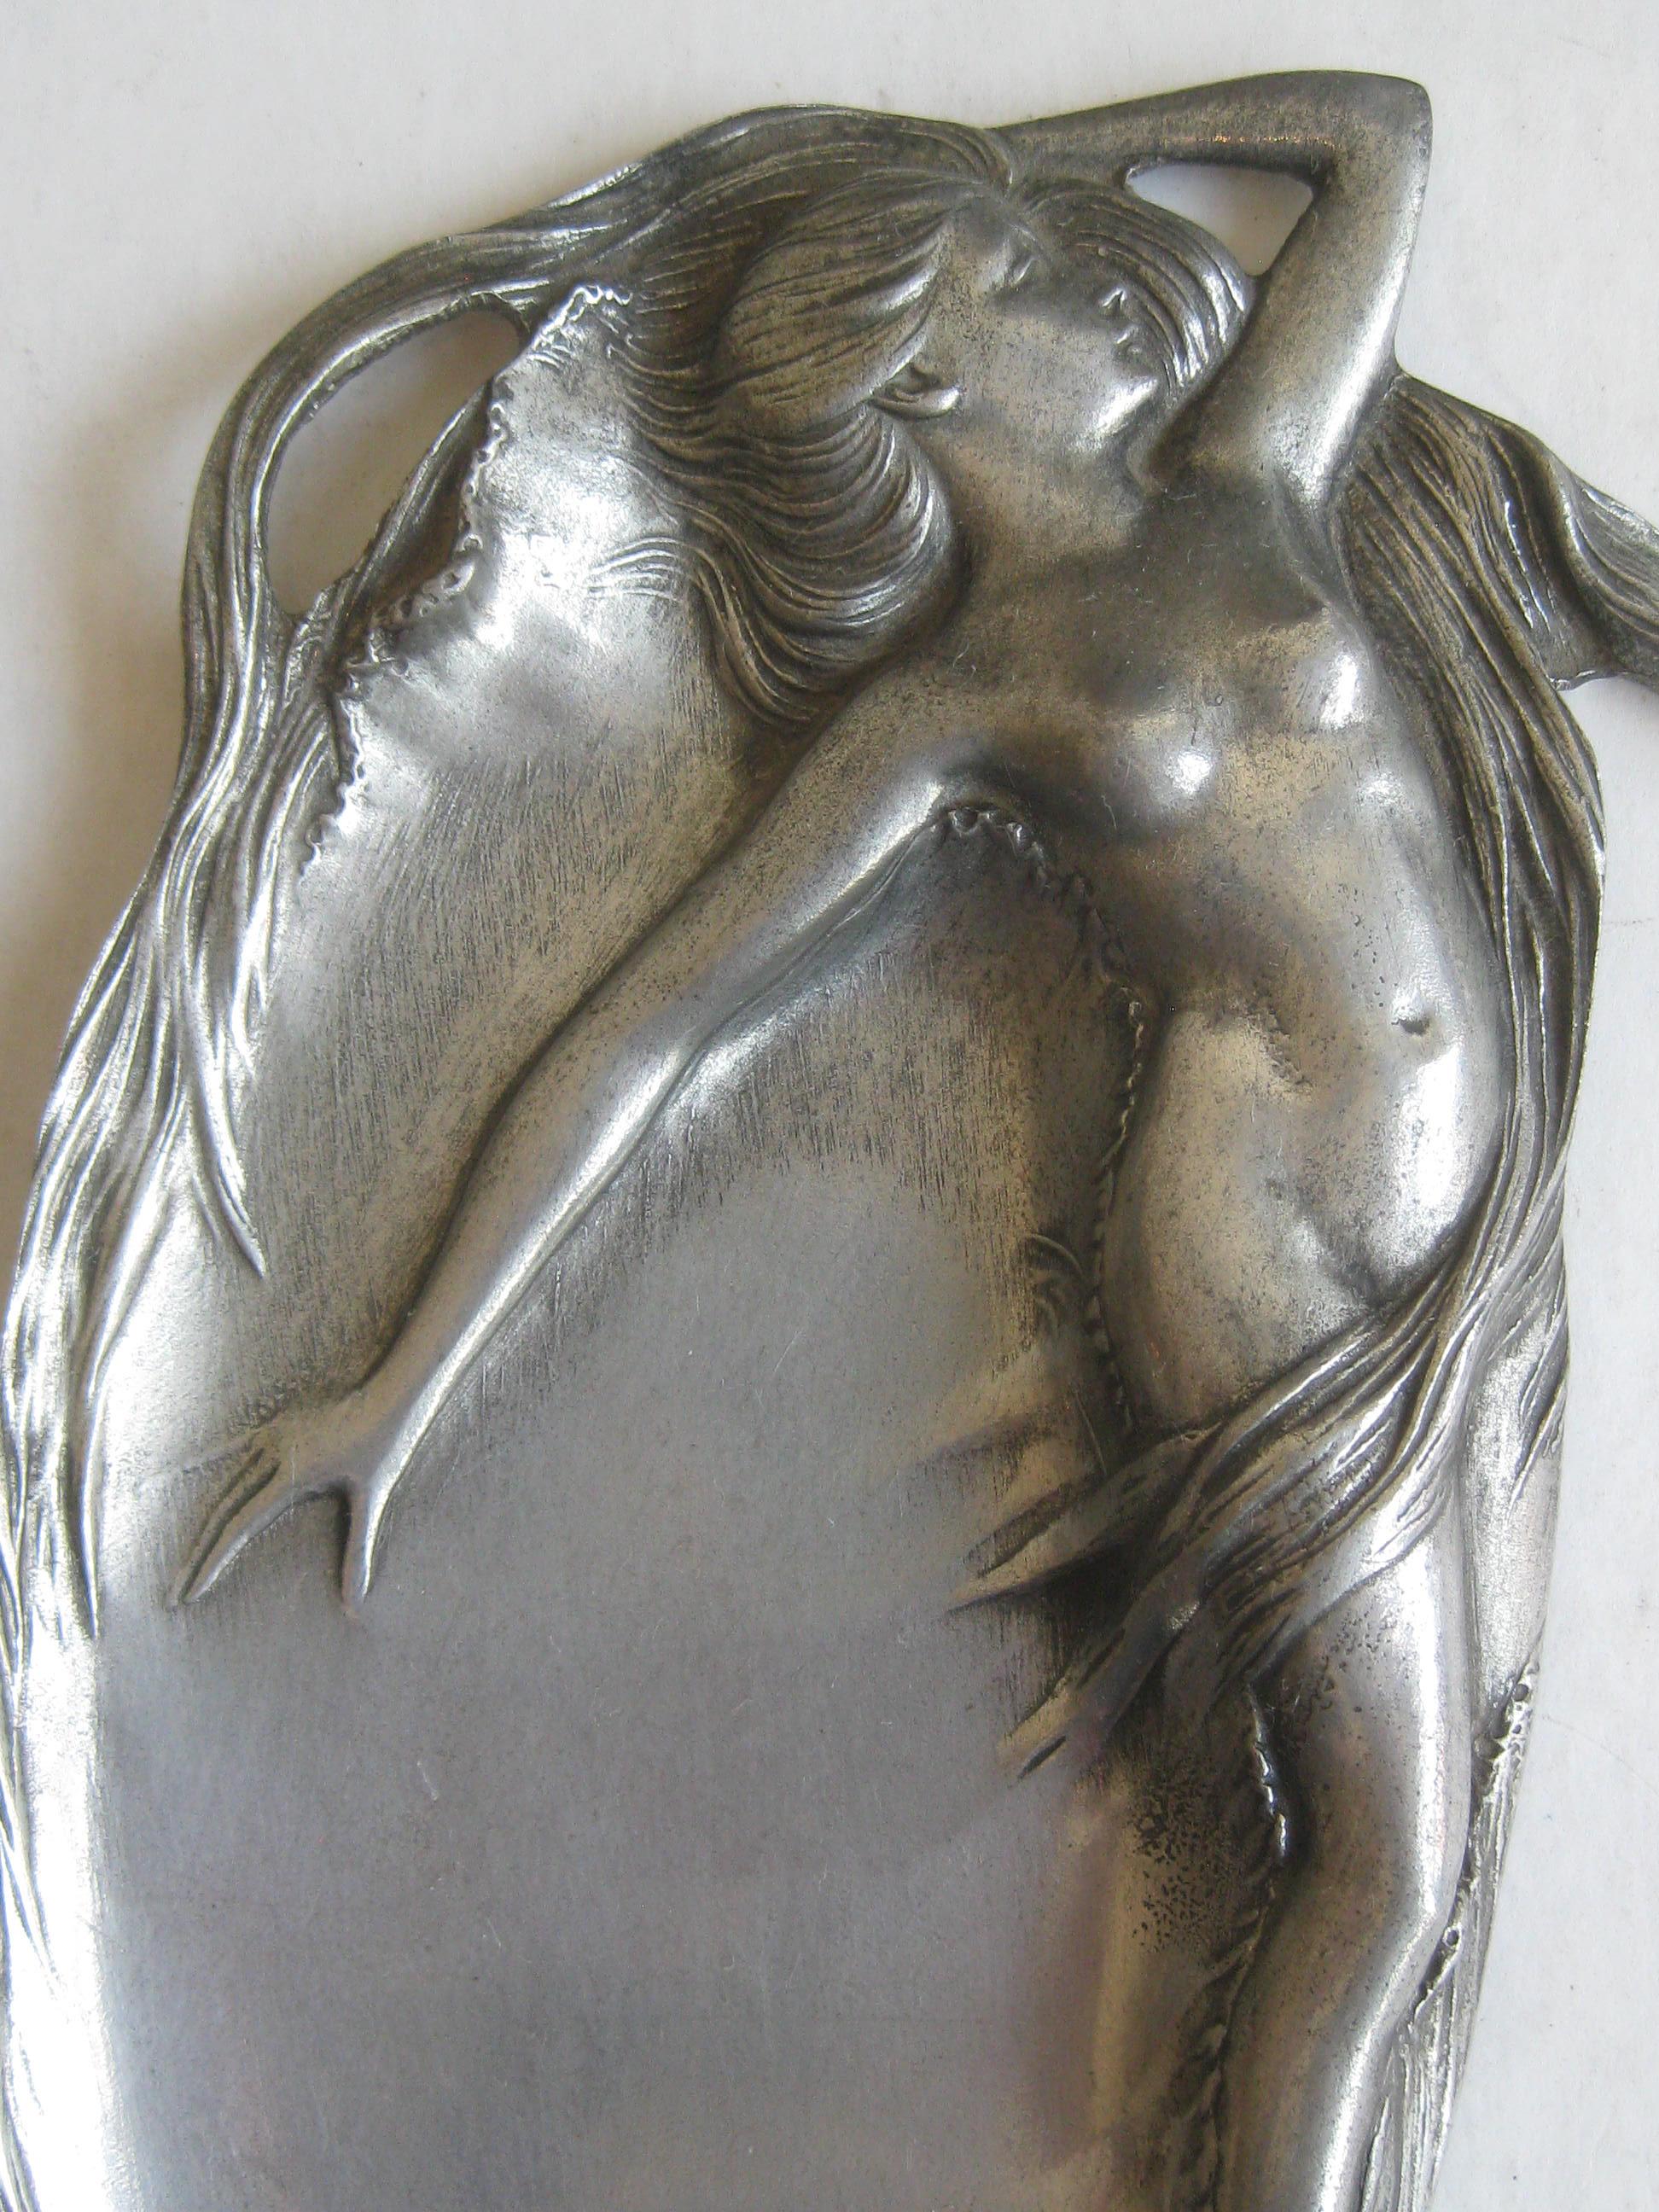 Great original Art Nouveau nude lady figural pewter tray, circa early 1900s. Great relief design. Signed on the bottom. by the company. The design has great detail and displays well. Nice original patina. In excellent original condition. Measures 8